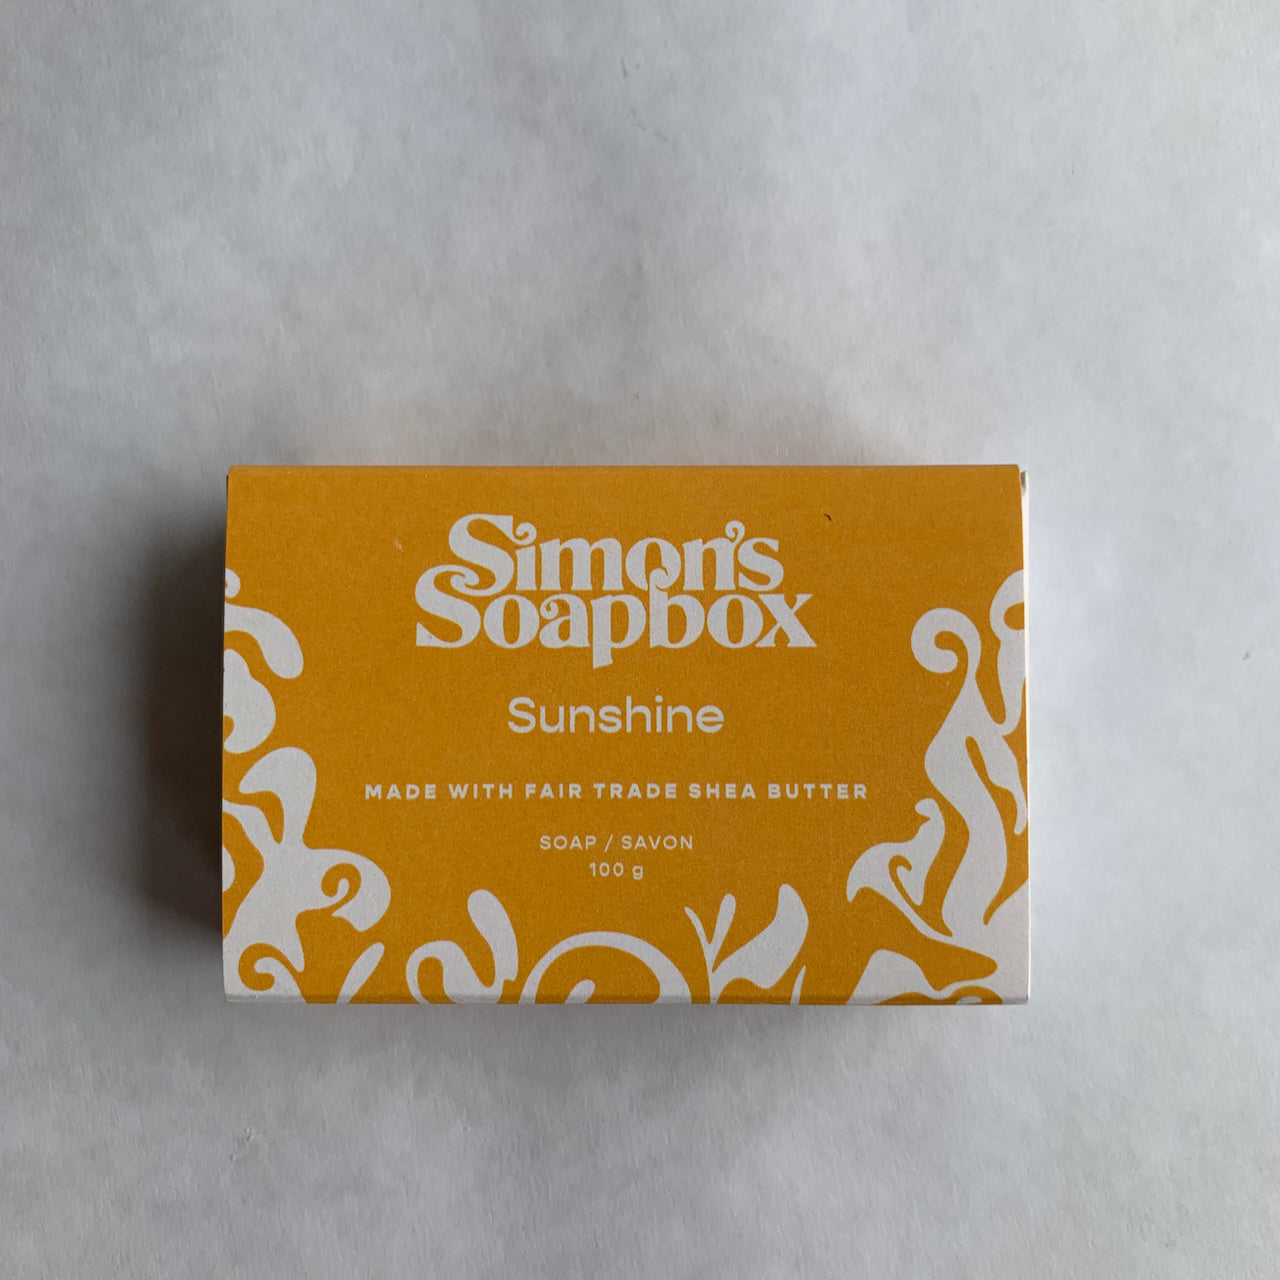 yellow rectangle package with swirl design and the words Simon's Soapbox Sunshine made with fair trade shea butter soap/savon 100 g